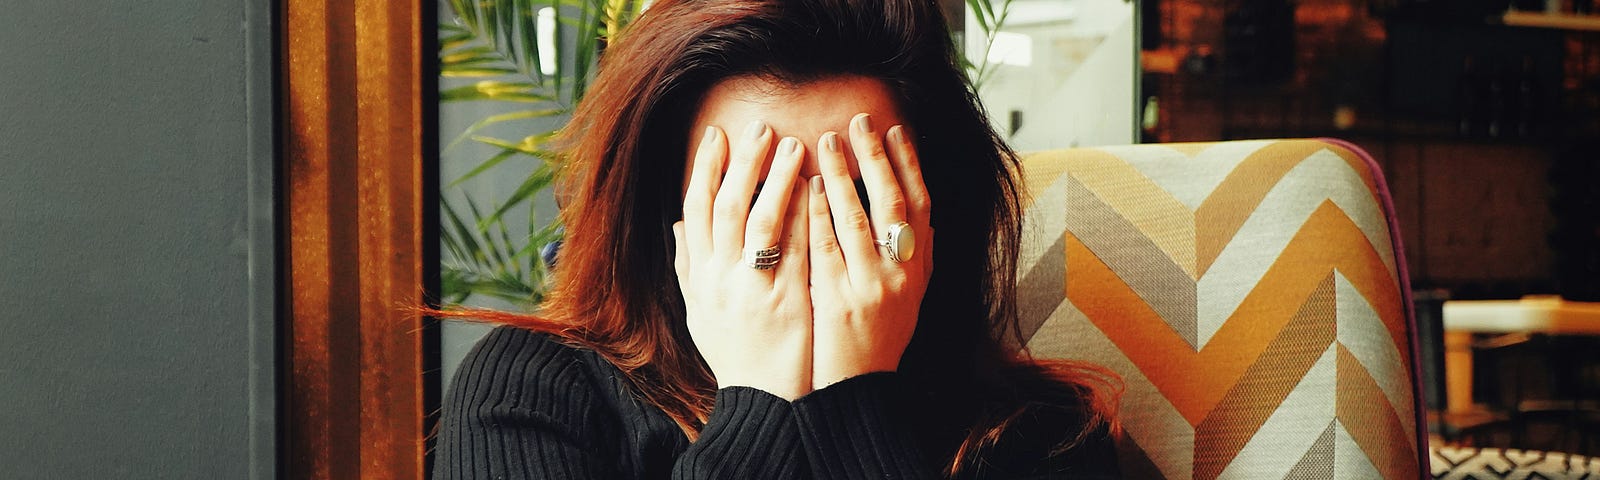 dark haired woman covering her face in her hands